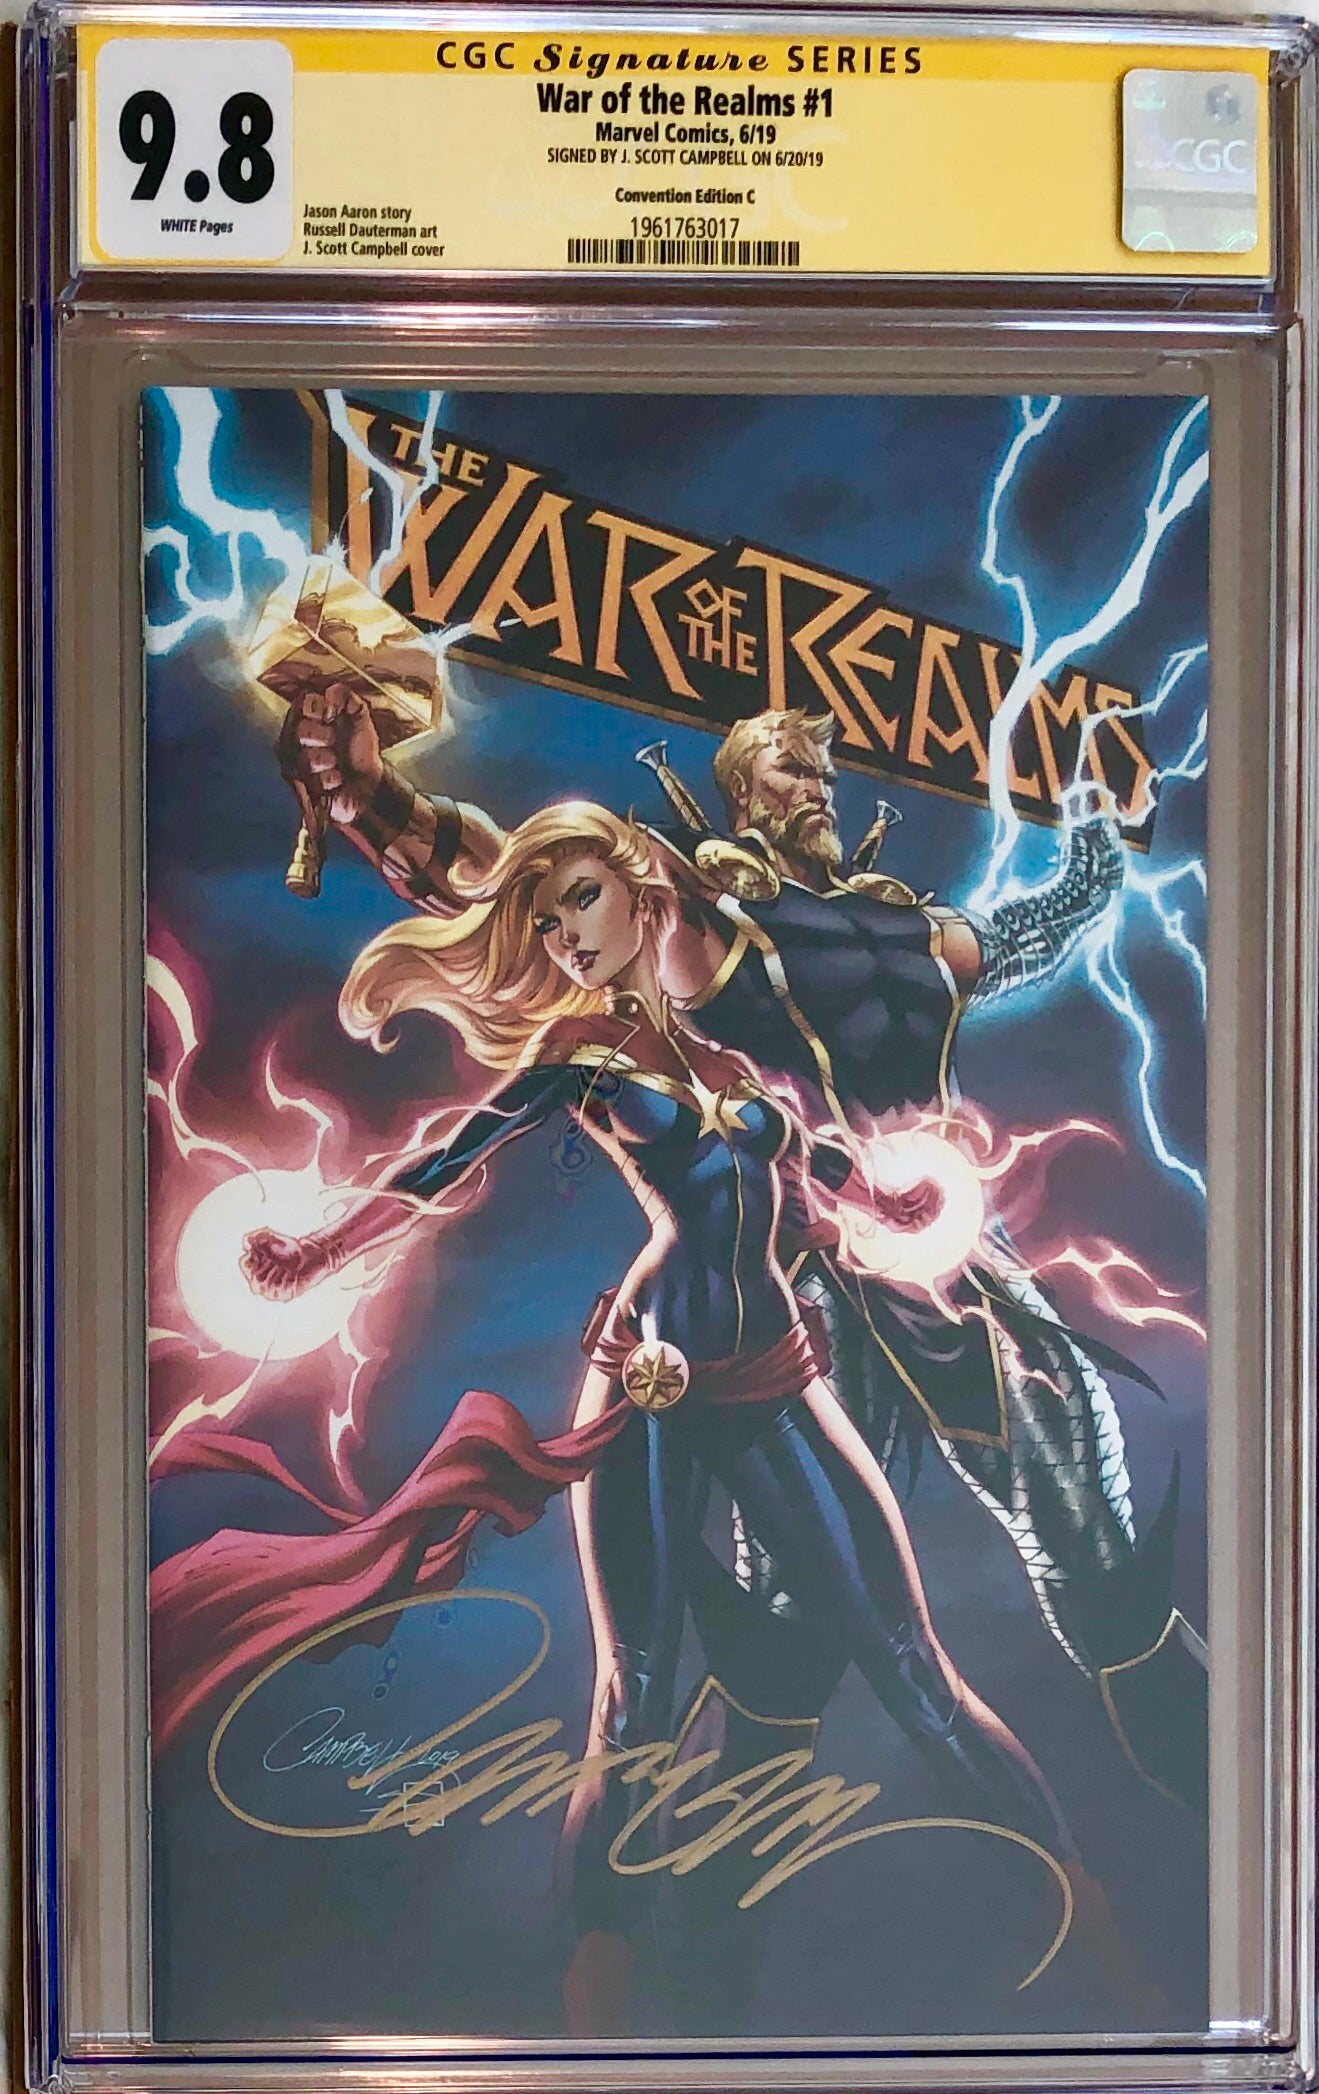 War of the Realms #1 J. Scott Campbell Con Exclusive C CGC 9.8 SS